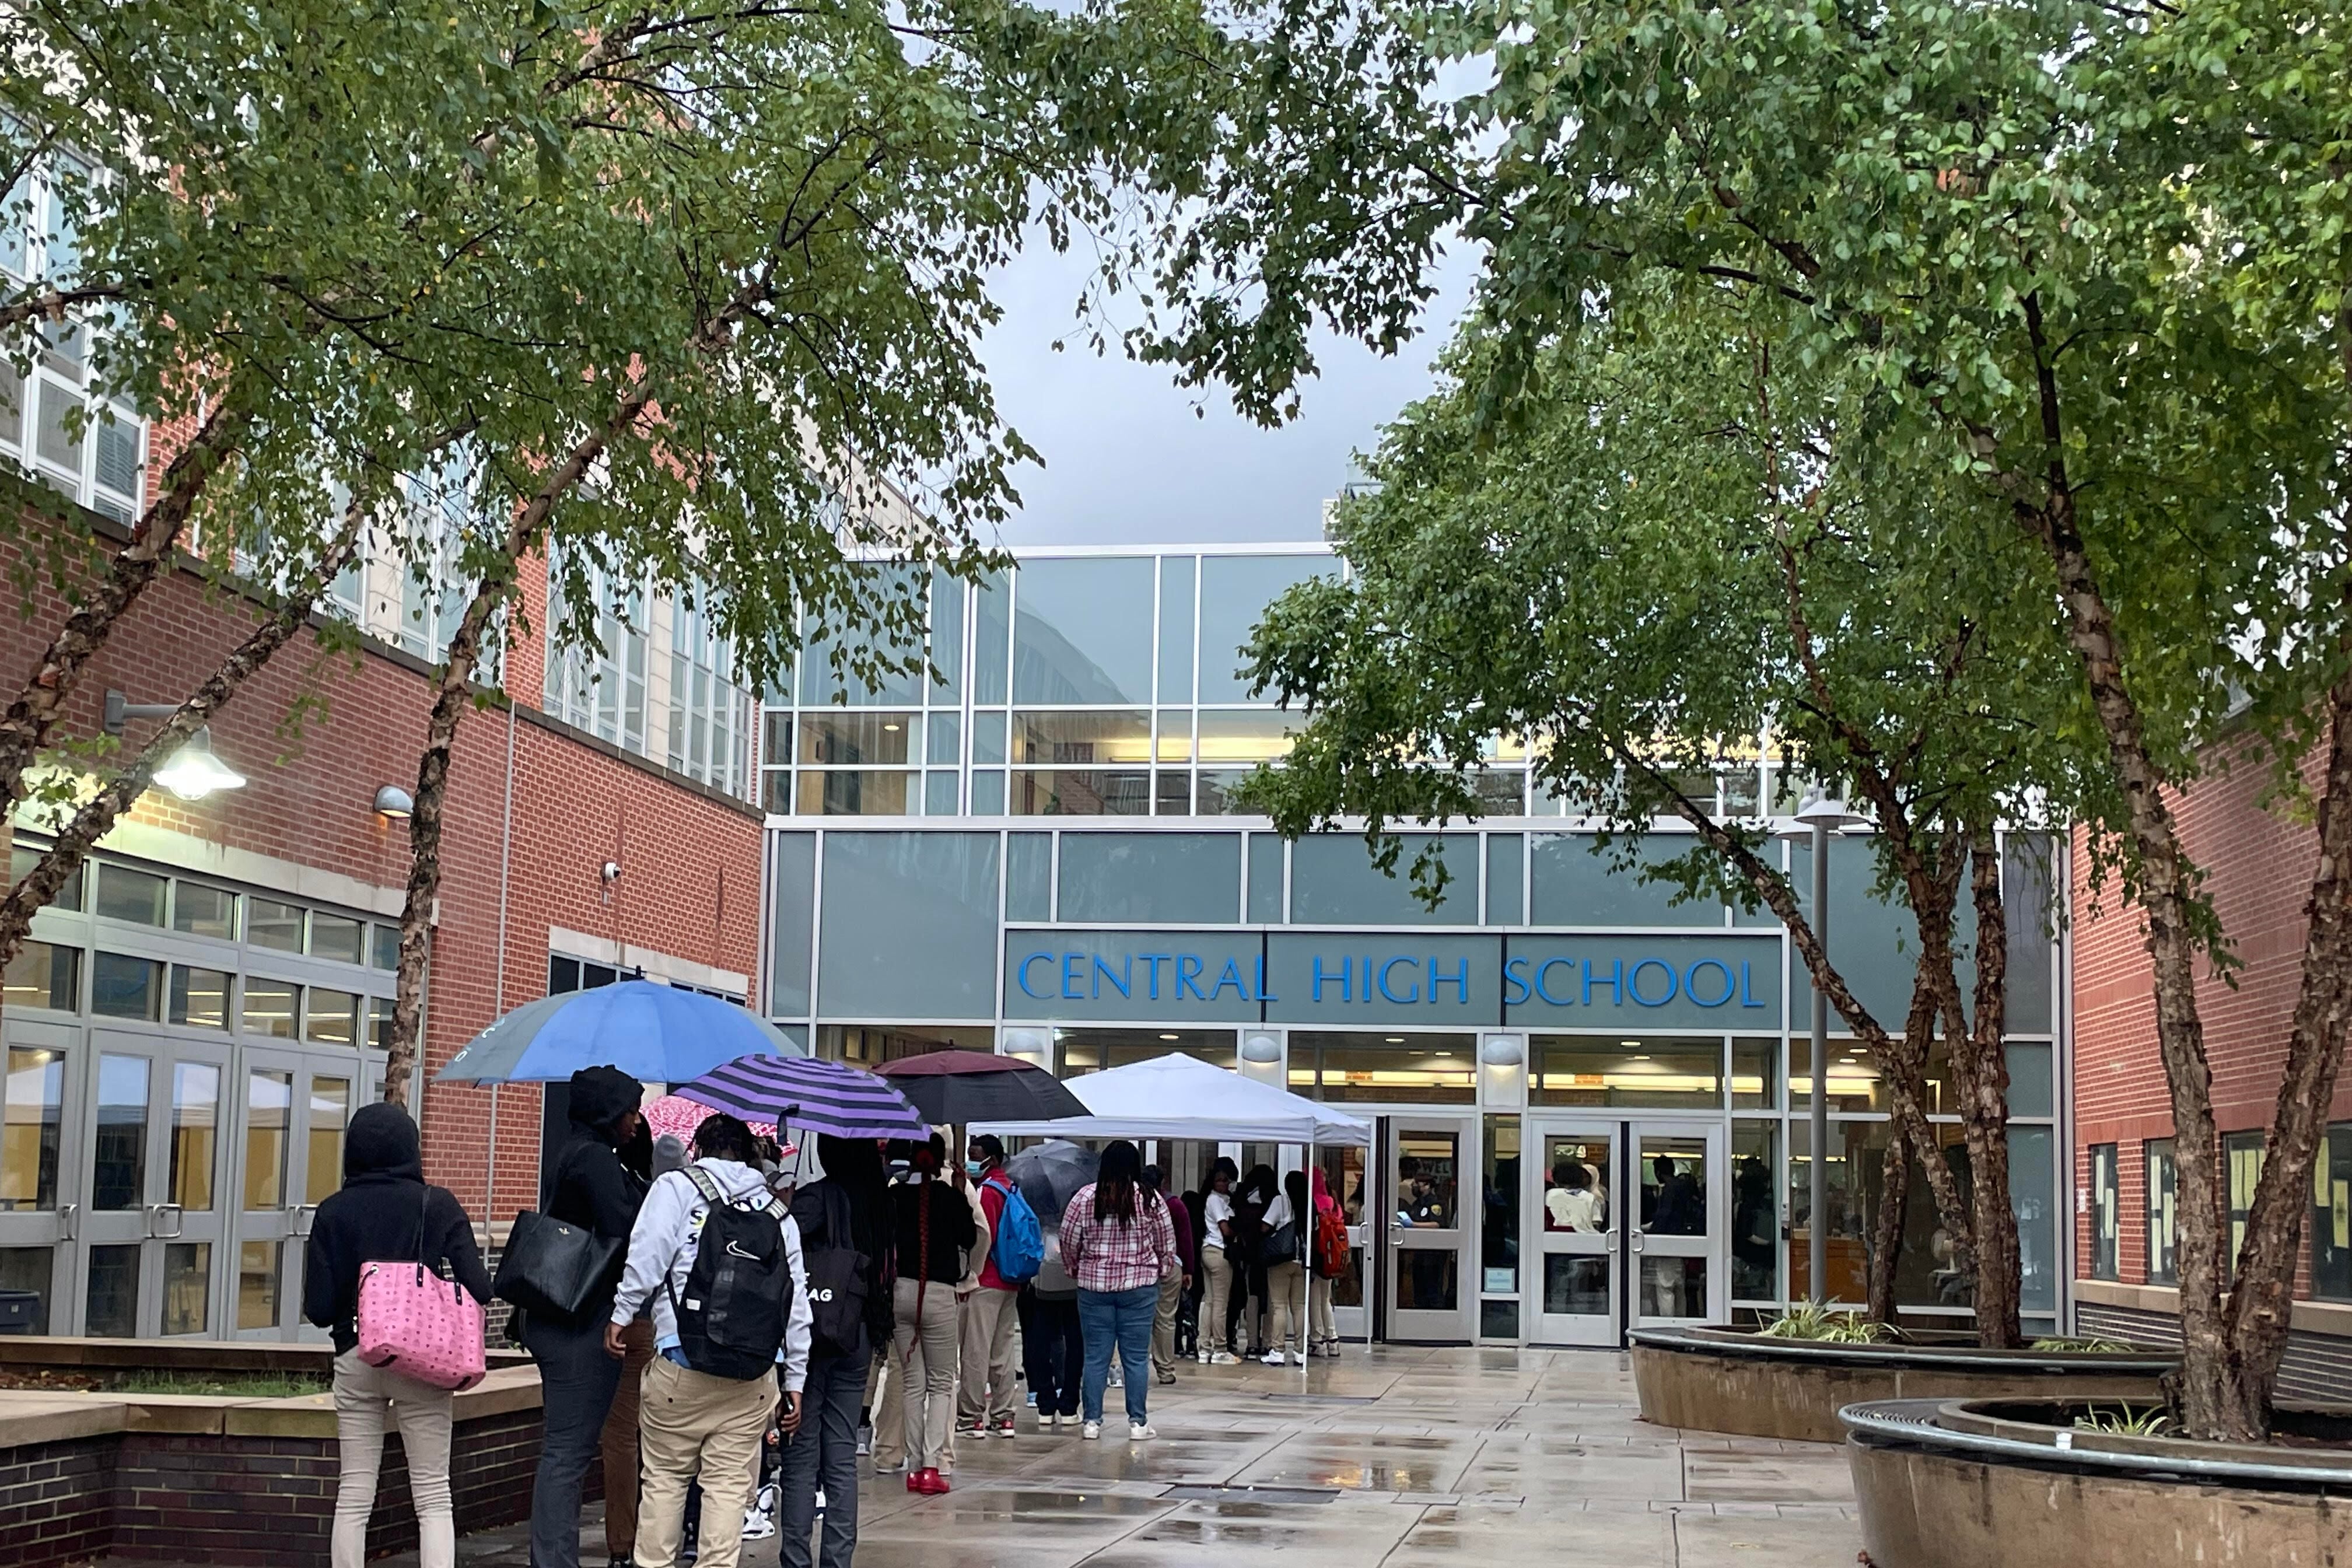 Students hold umbrellas as they stand in a line outside a high school with trees lining the entrance as it rains.